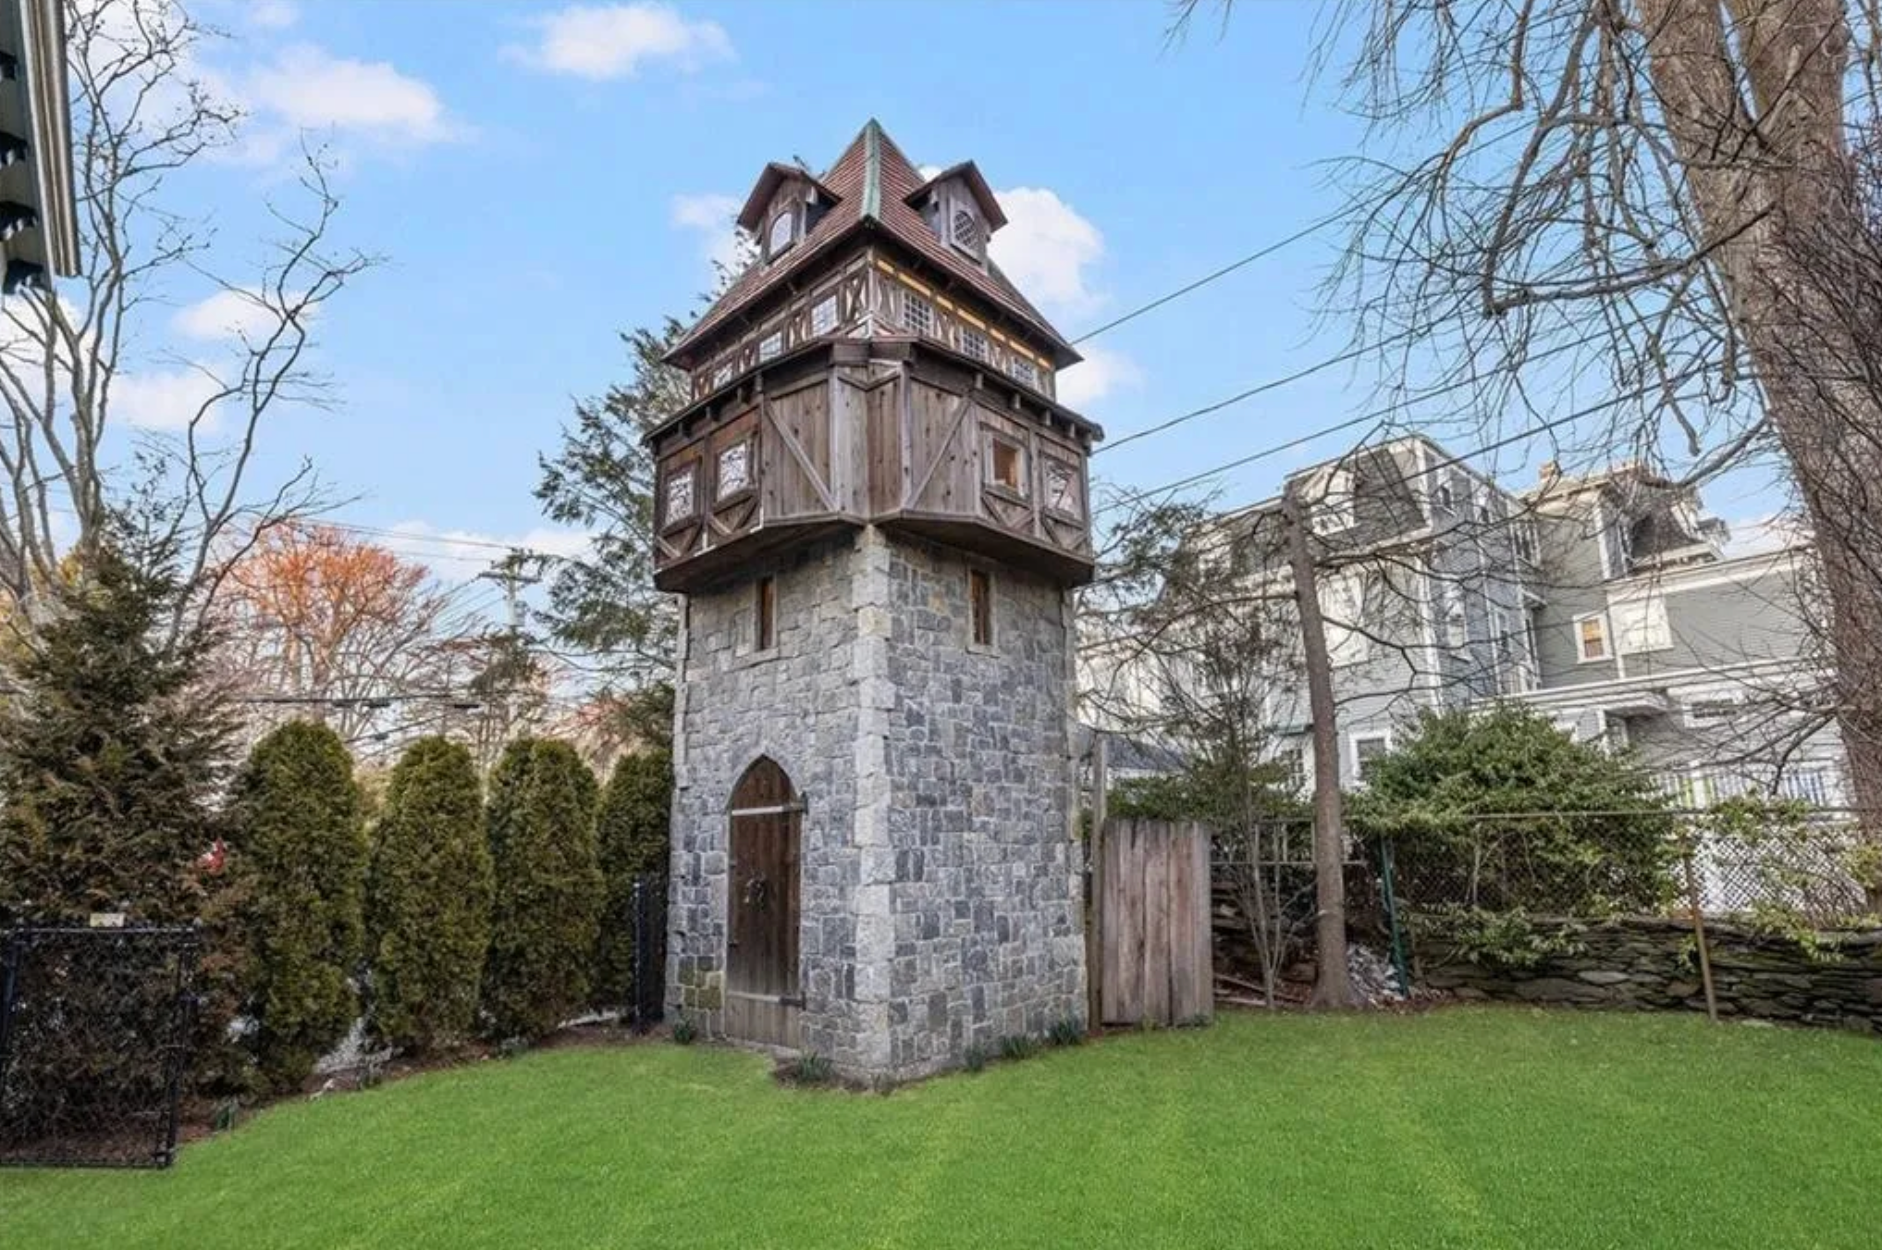 The house has a three-story watchtower in its backyard.